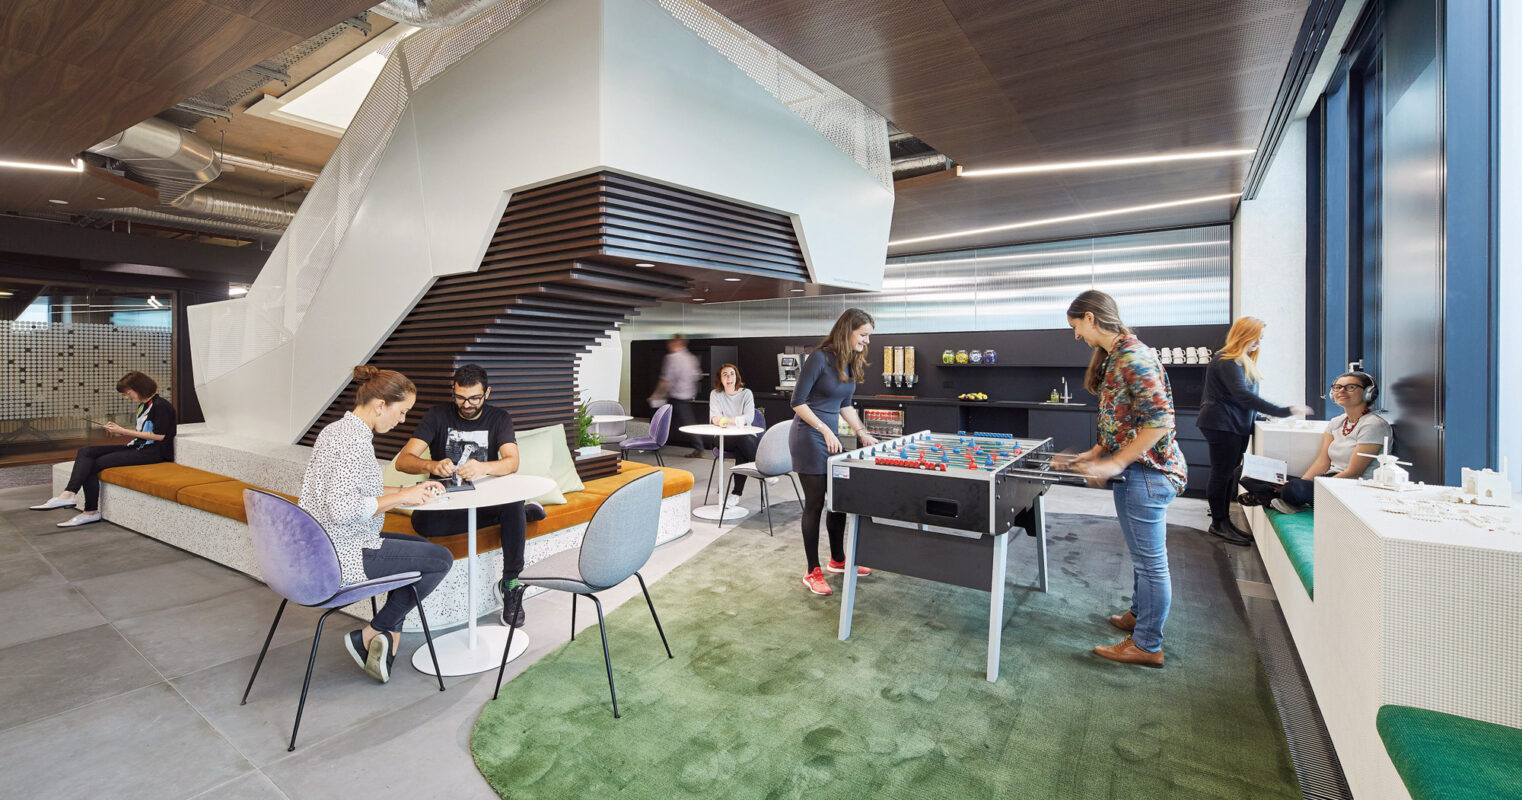 Modern open-plan office space with a variety of seating arrangements featuring eclectic furniture. Employees engage casually around a foosball table. Overhead, exposed ductwork complements the industrial-chic aesthetic, while vibrant green carpeting adds a pop of color, aiding in zone delineation.